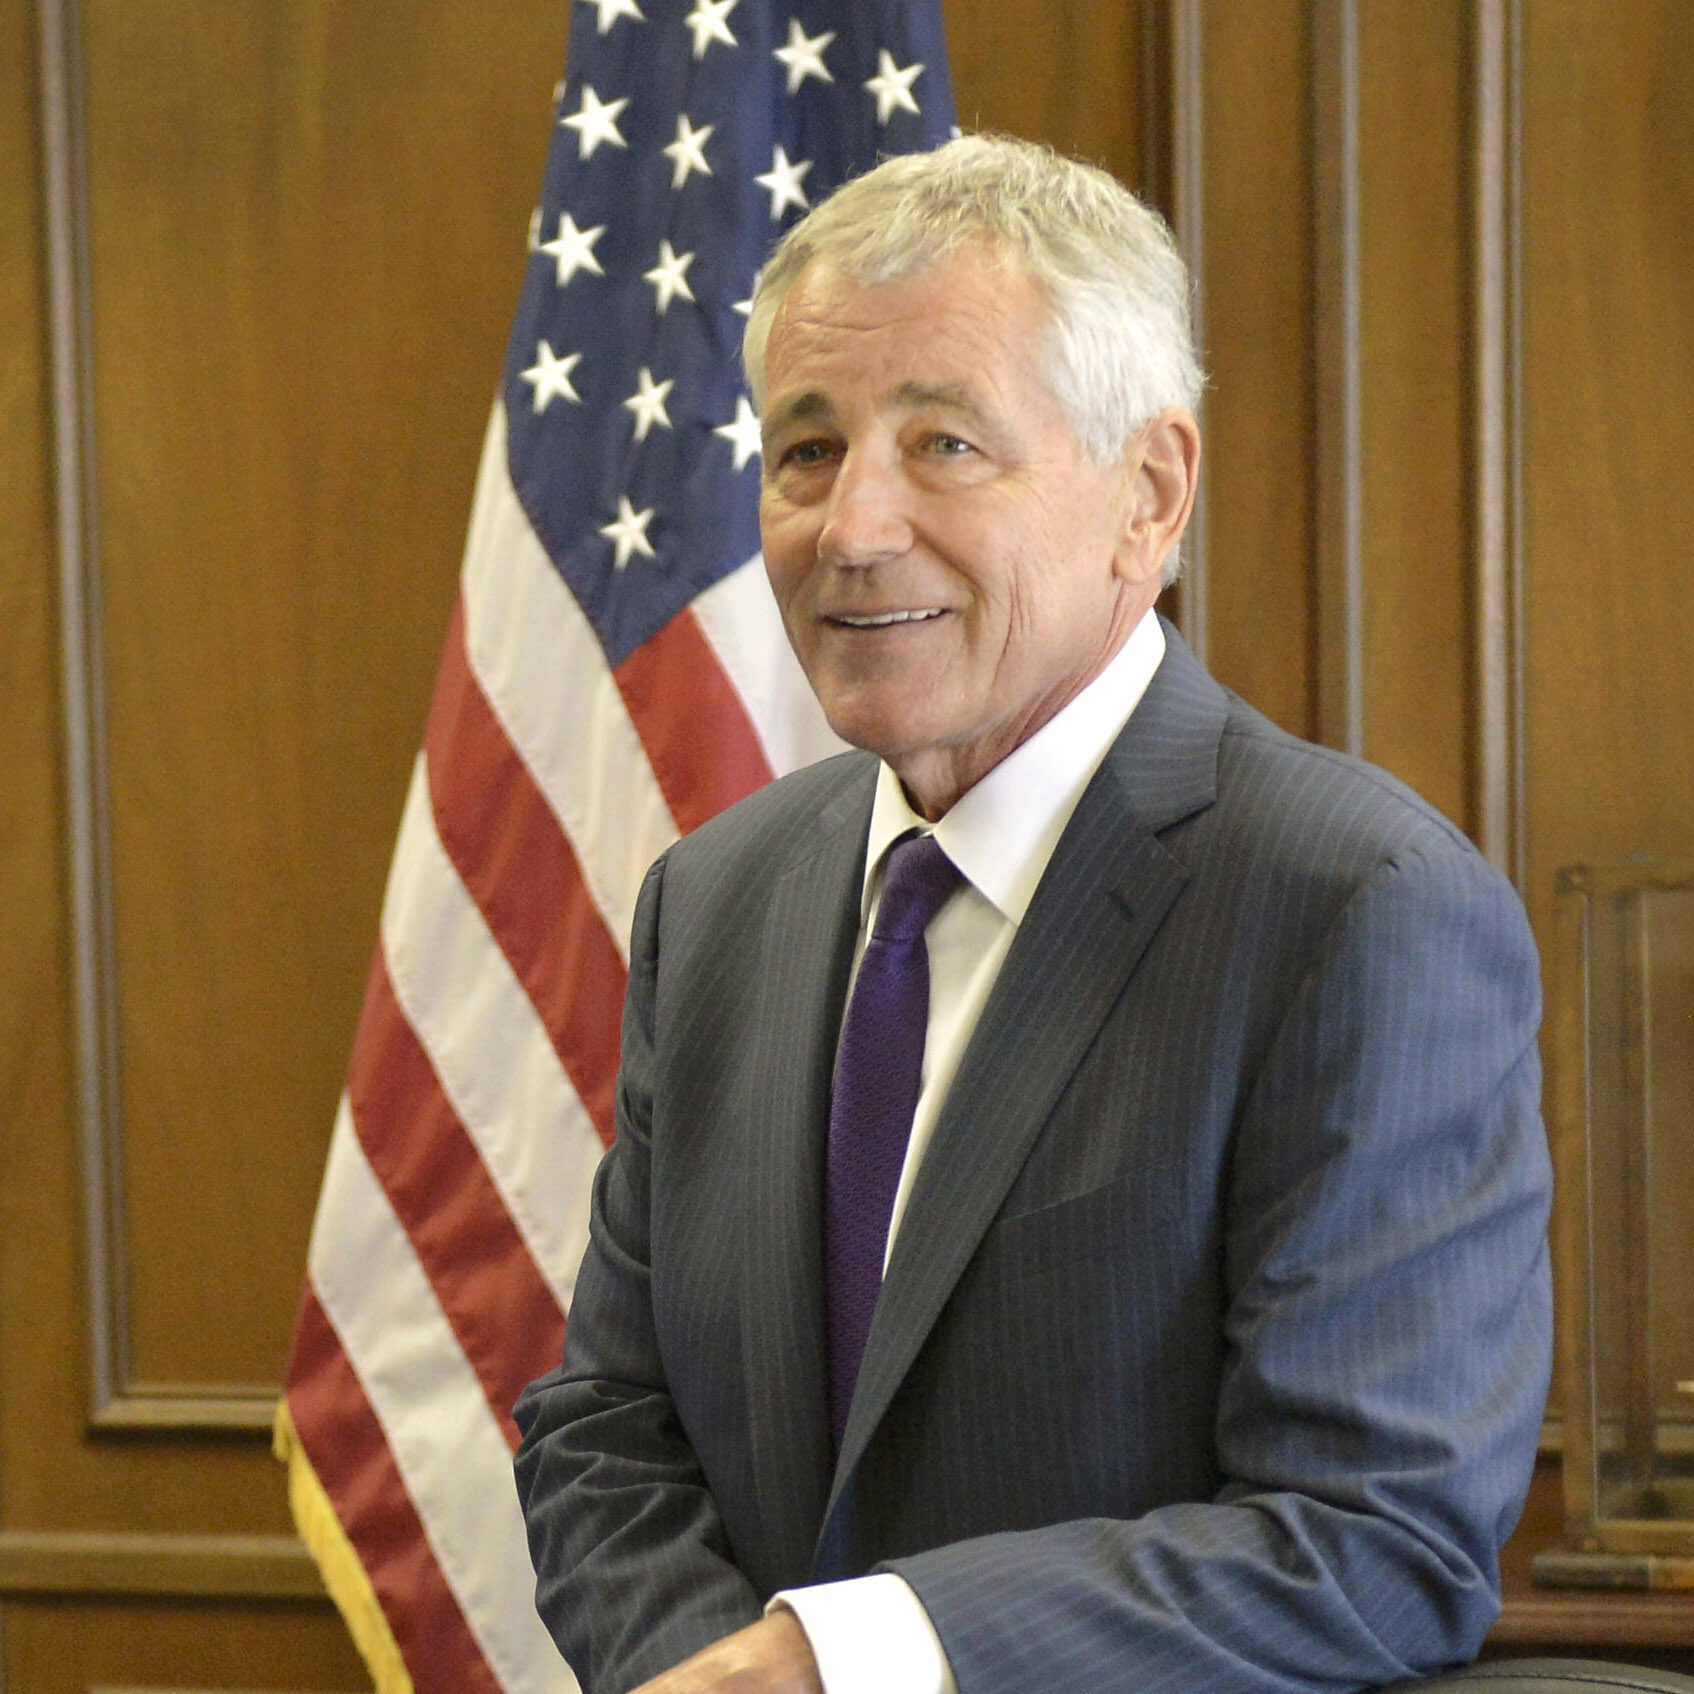 Secretary of Defense Chuck Hagel visits with Naval War College President Rear Admiral P. "Gardner" Howe in his office prior to participating in a moderated forum in the college's auditorium in Newport, RI, September 3, 2014. DoD Photo by Glenn Fawcett (Released)